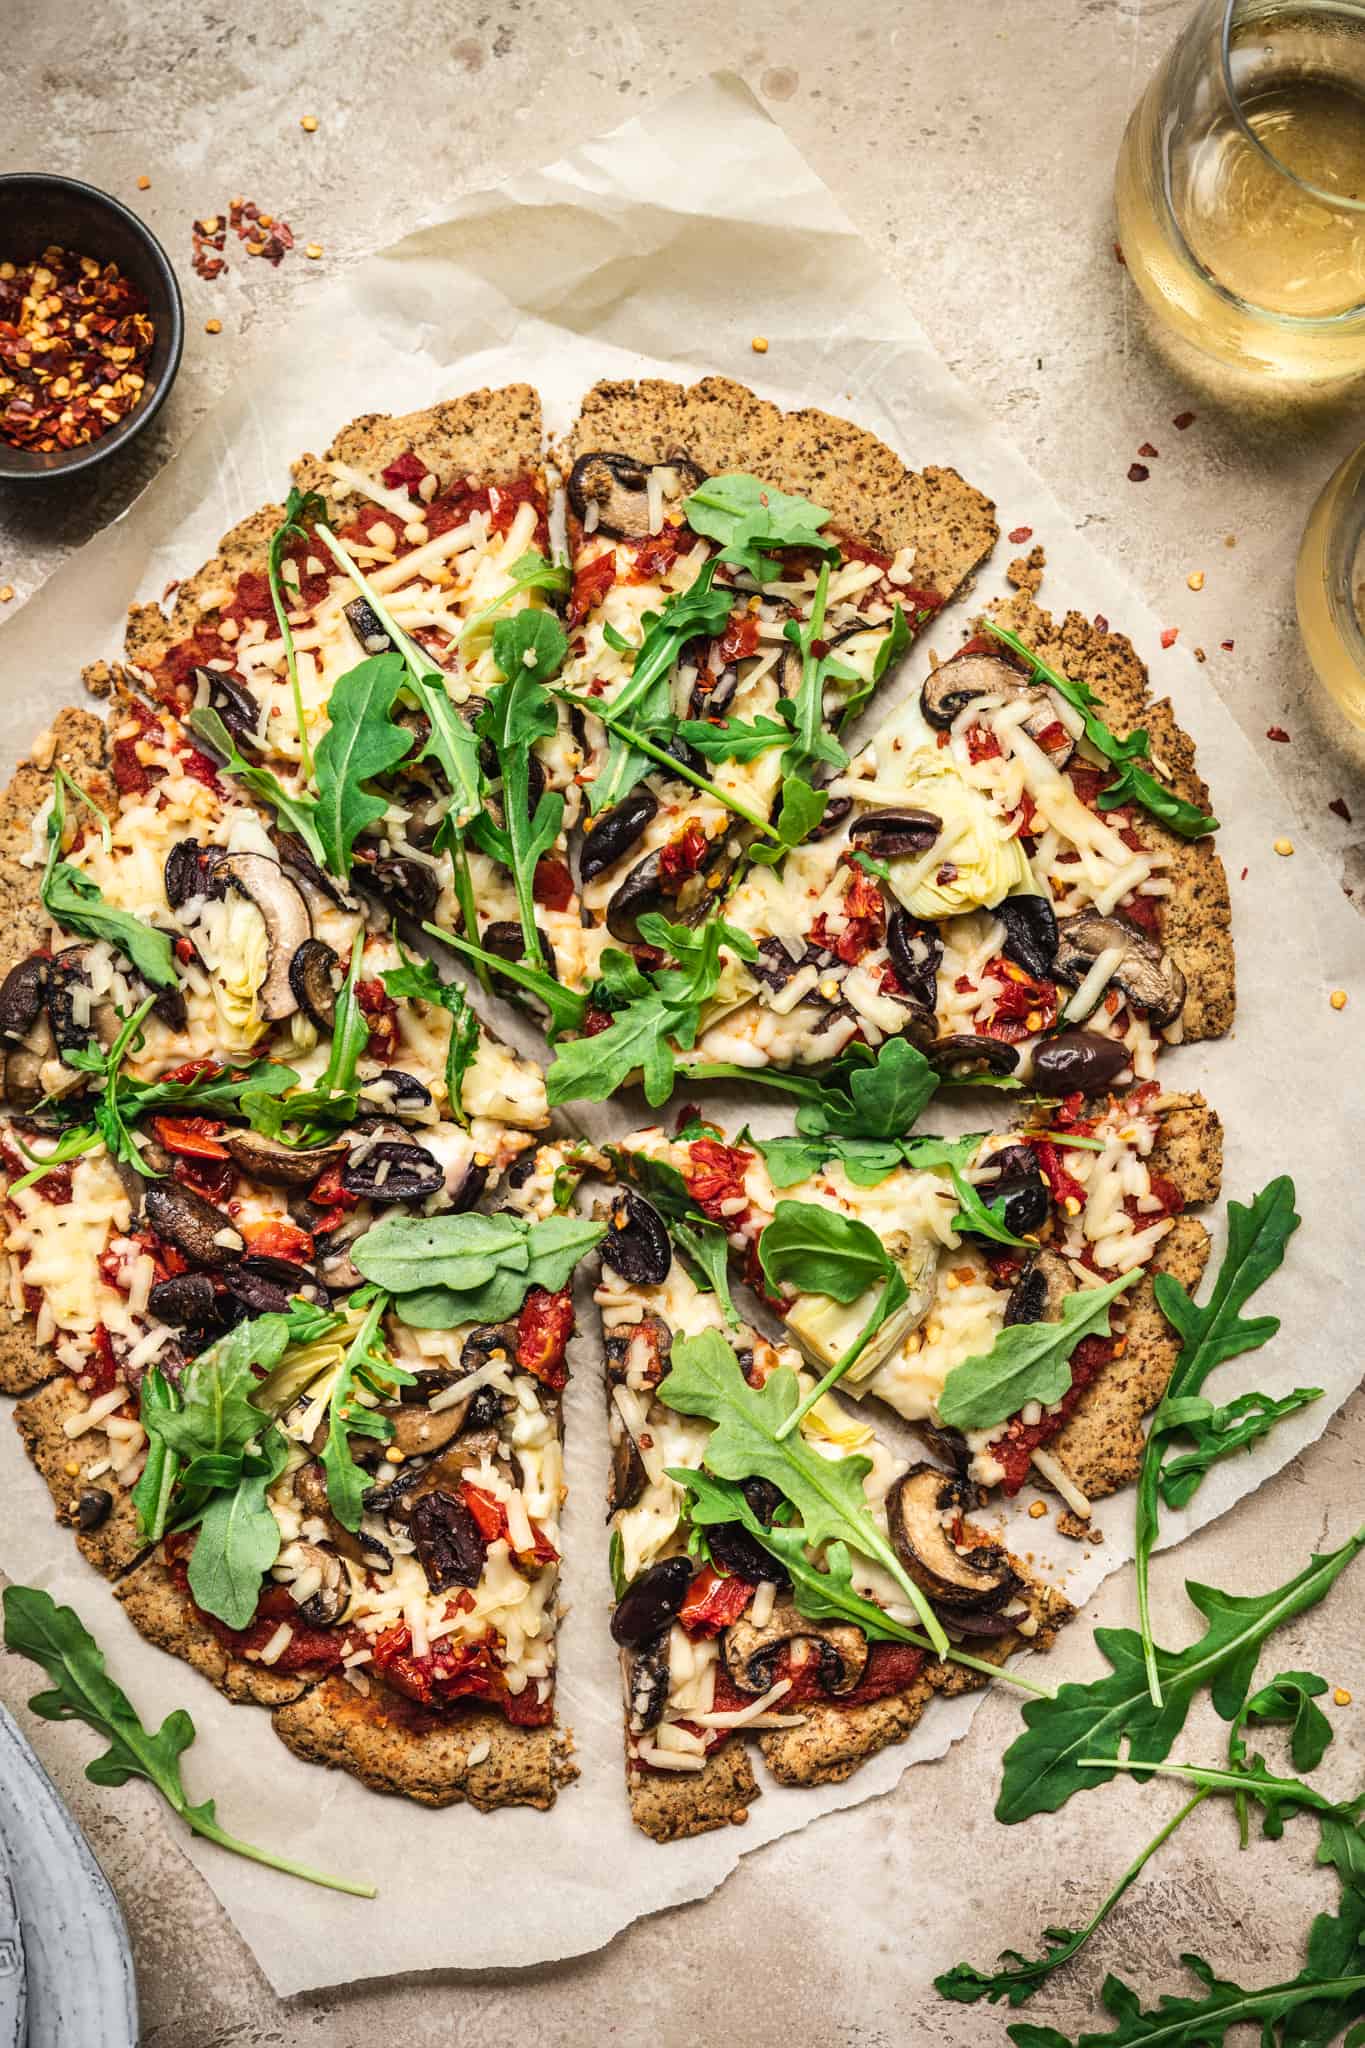 Overhead view of Crispy Cauliflower Vegan Pizza Crust with vegan pizza toppings on rustic background with white wine